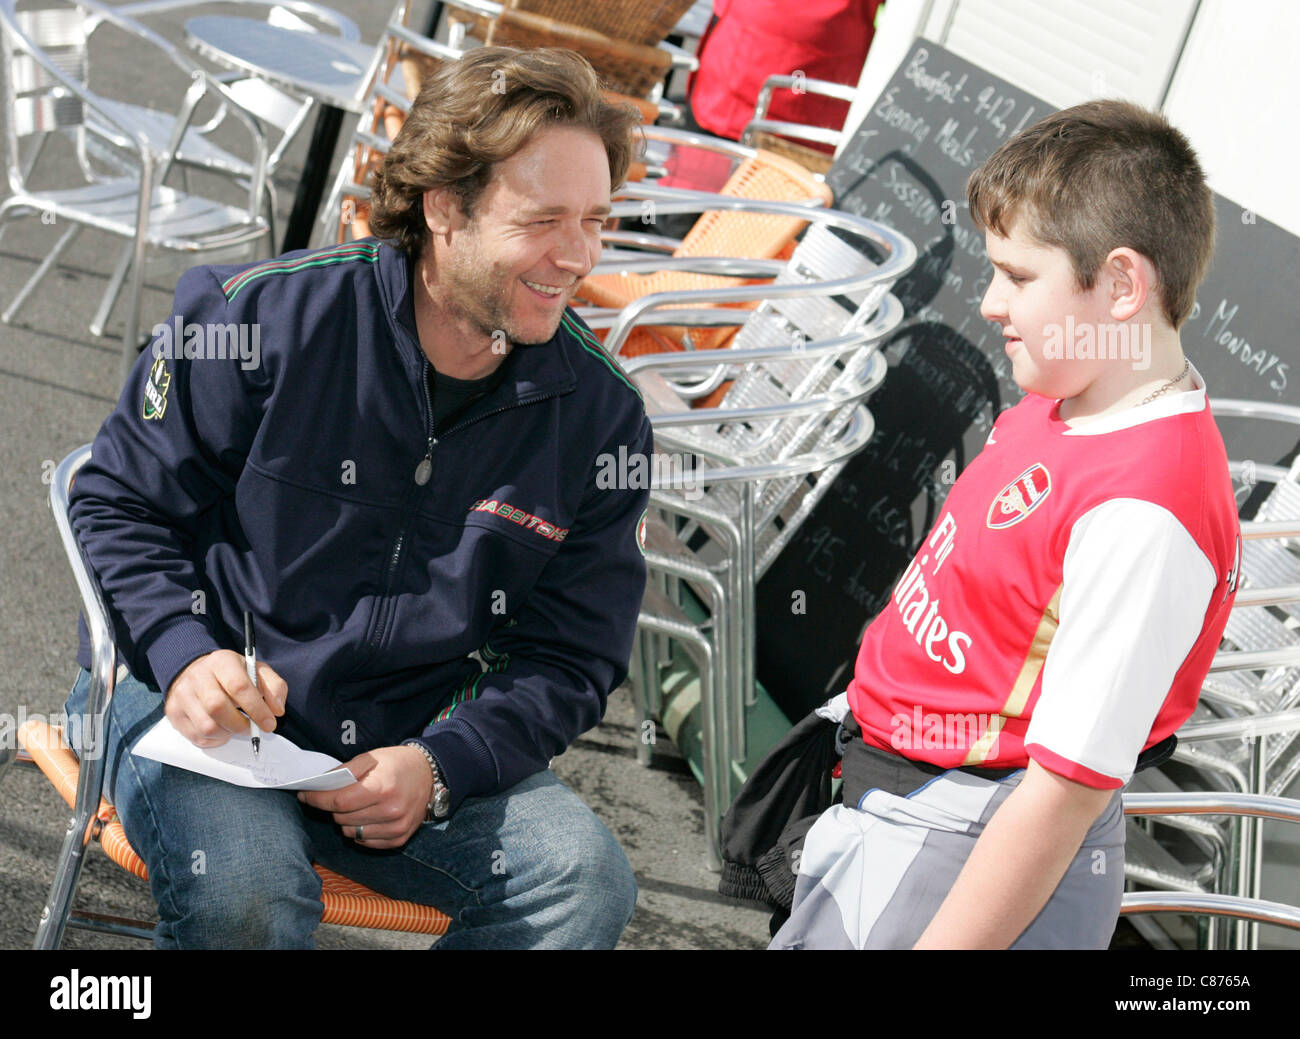 Russell Crowe chats with young arsenal football fan while signing autograph Stock Photo